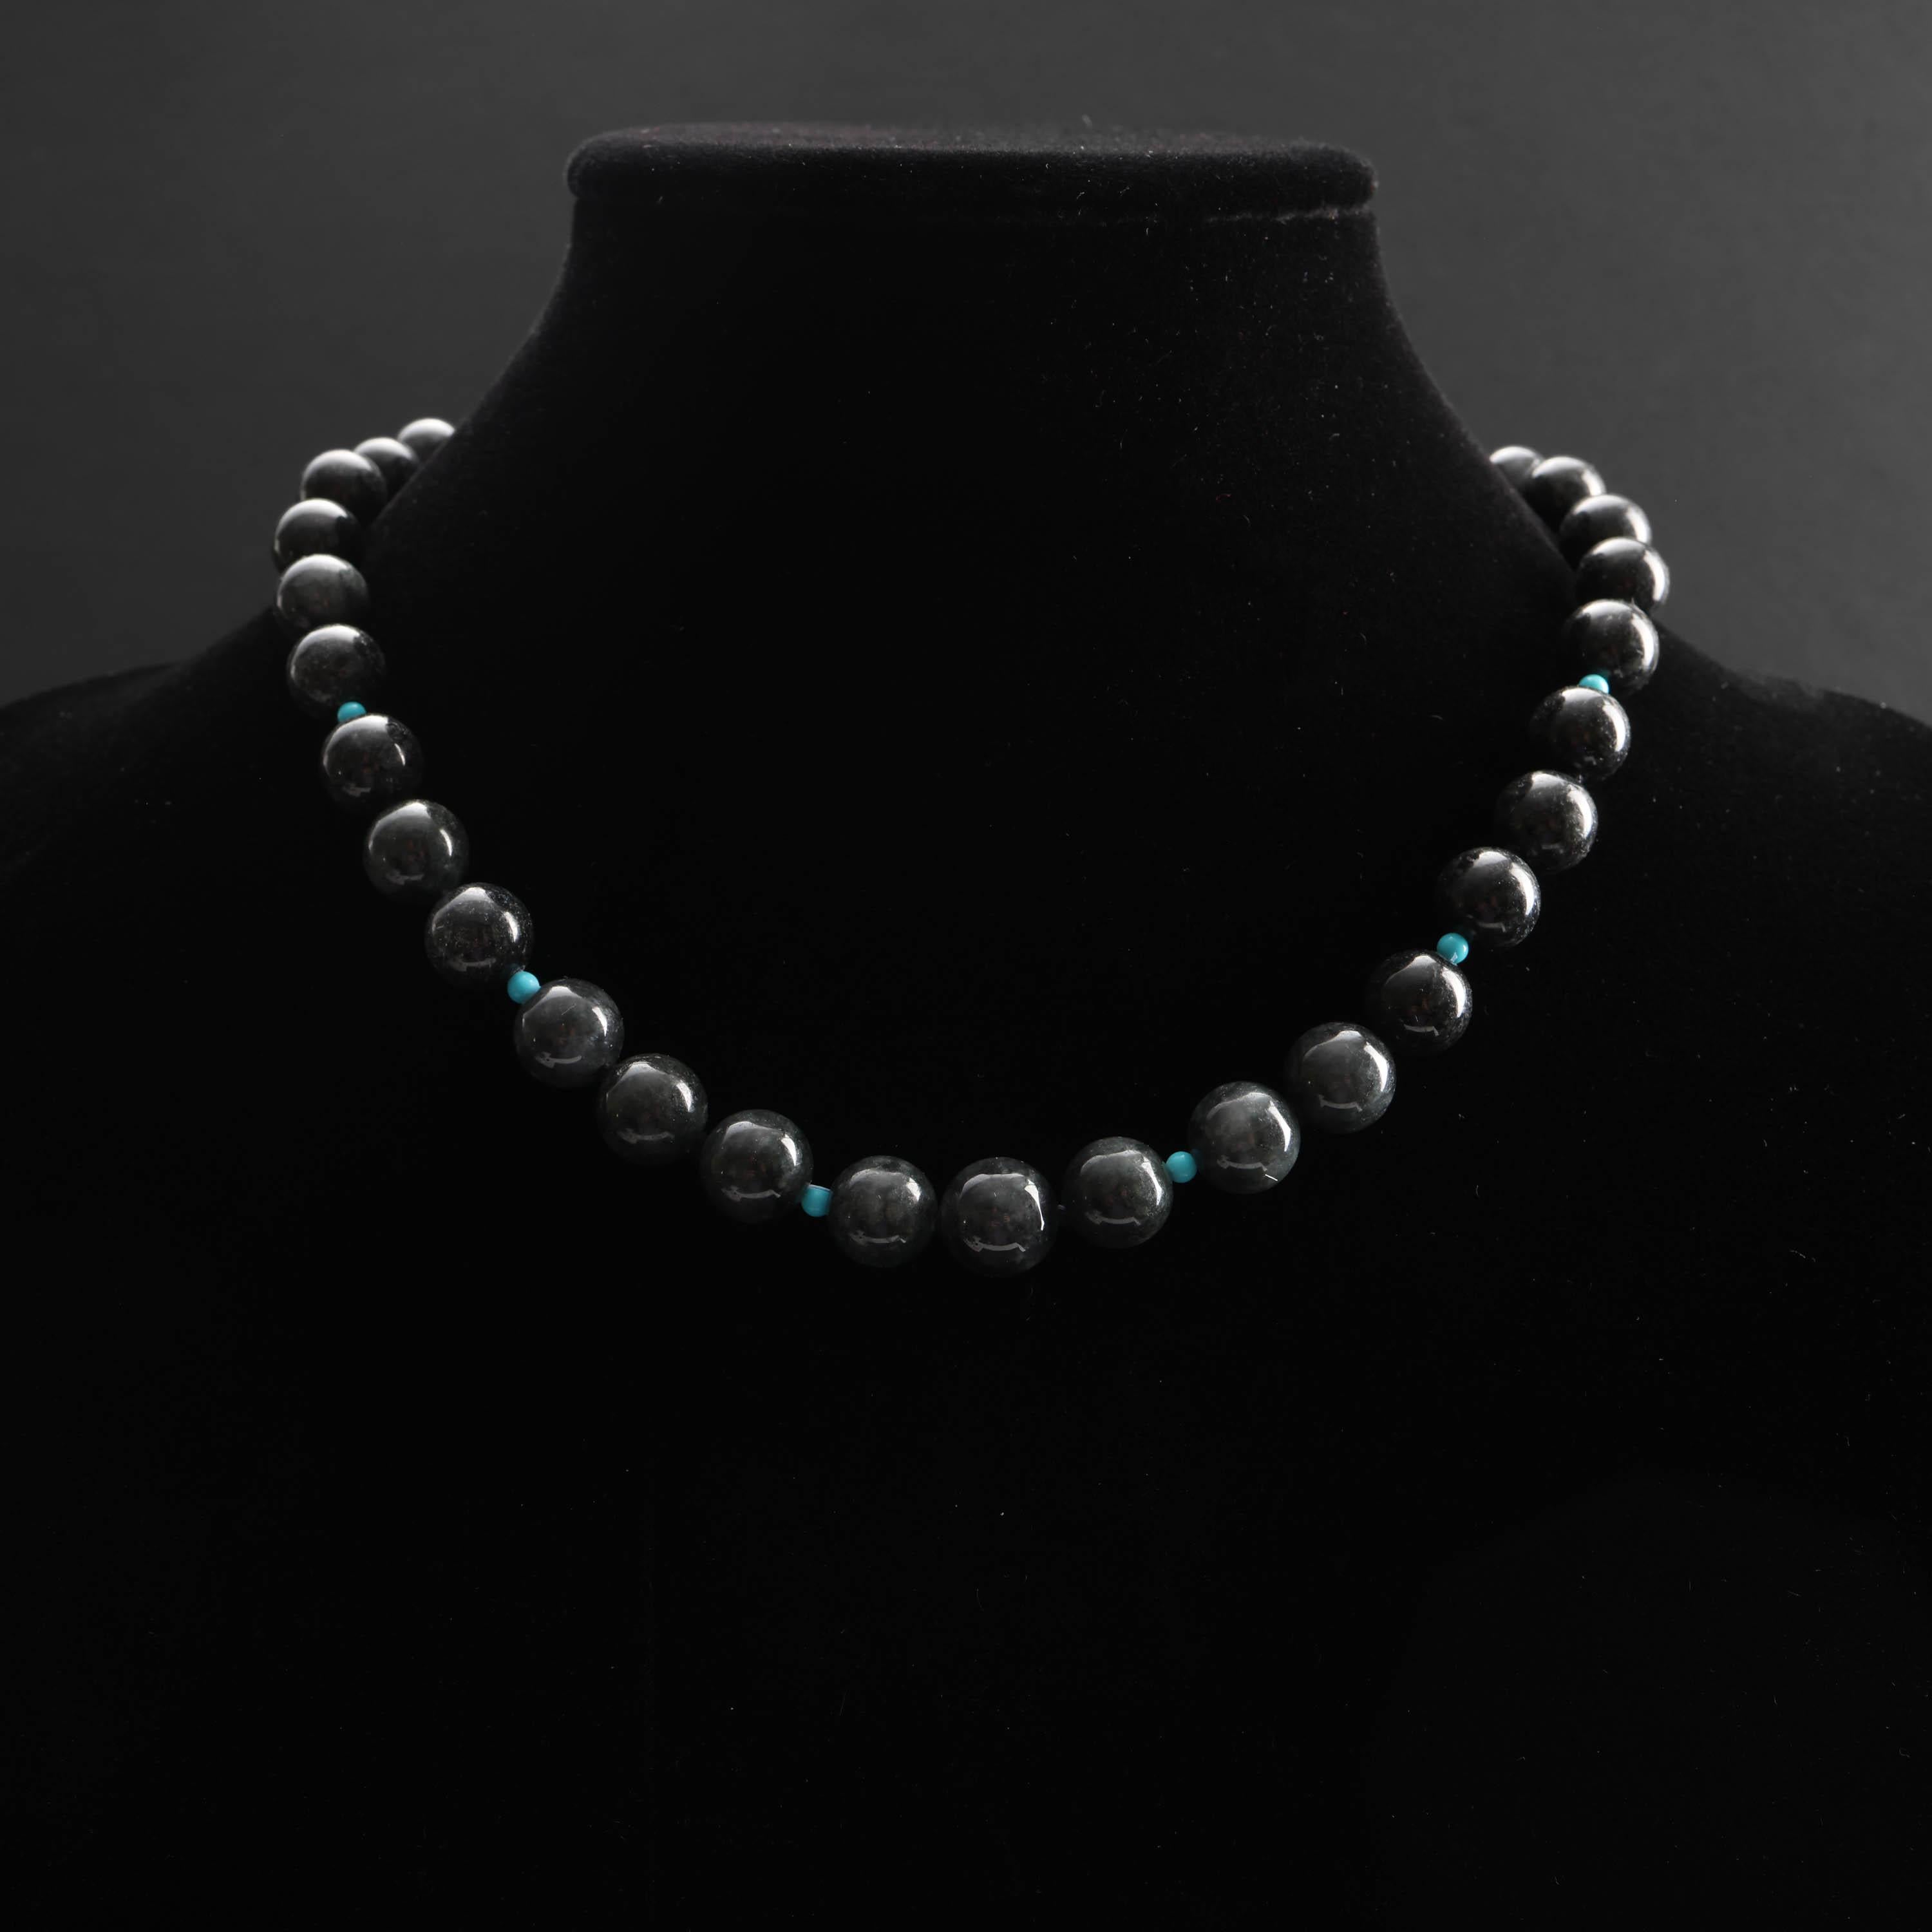 Women's or Men's Black Jade Necklace with Turquoise Accent Beads Certified Untreated Jadeite Jade For Sale